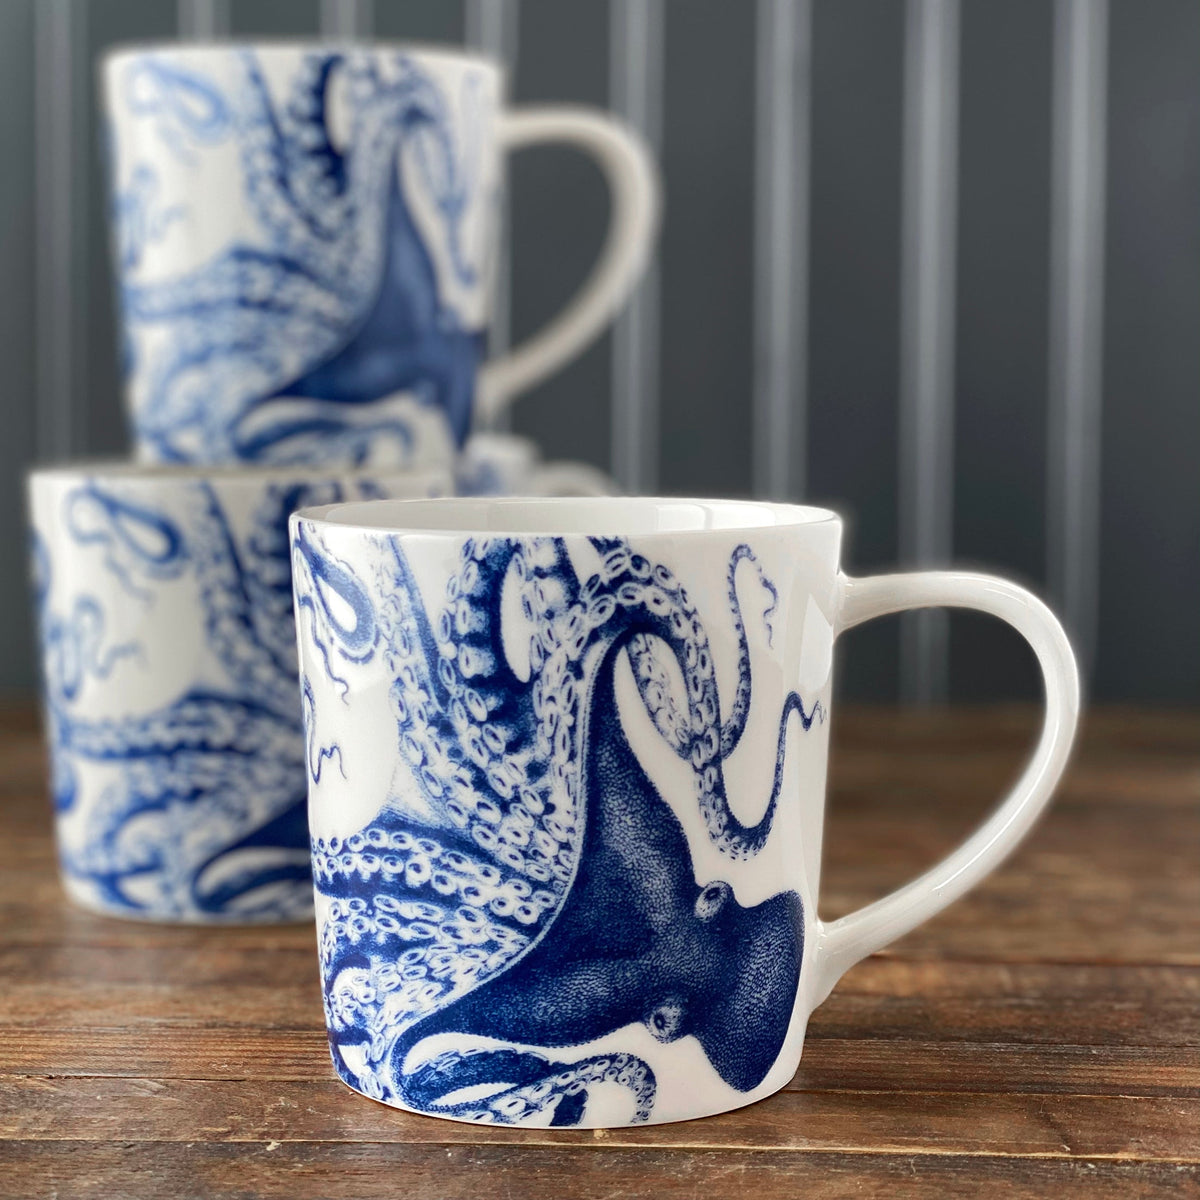 Lucy the octopus with her oversized Lucy Mug Blue from Caskata Artisanal Home, surrounded by deep sea blue and white mugs, resting on a wooden table.